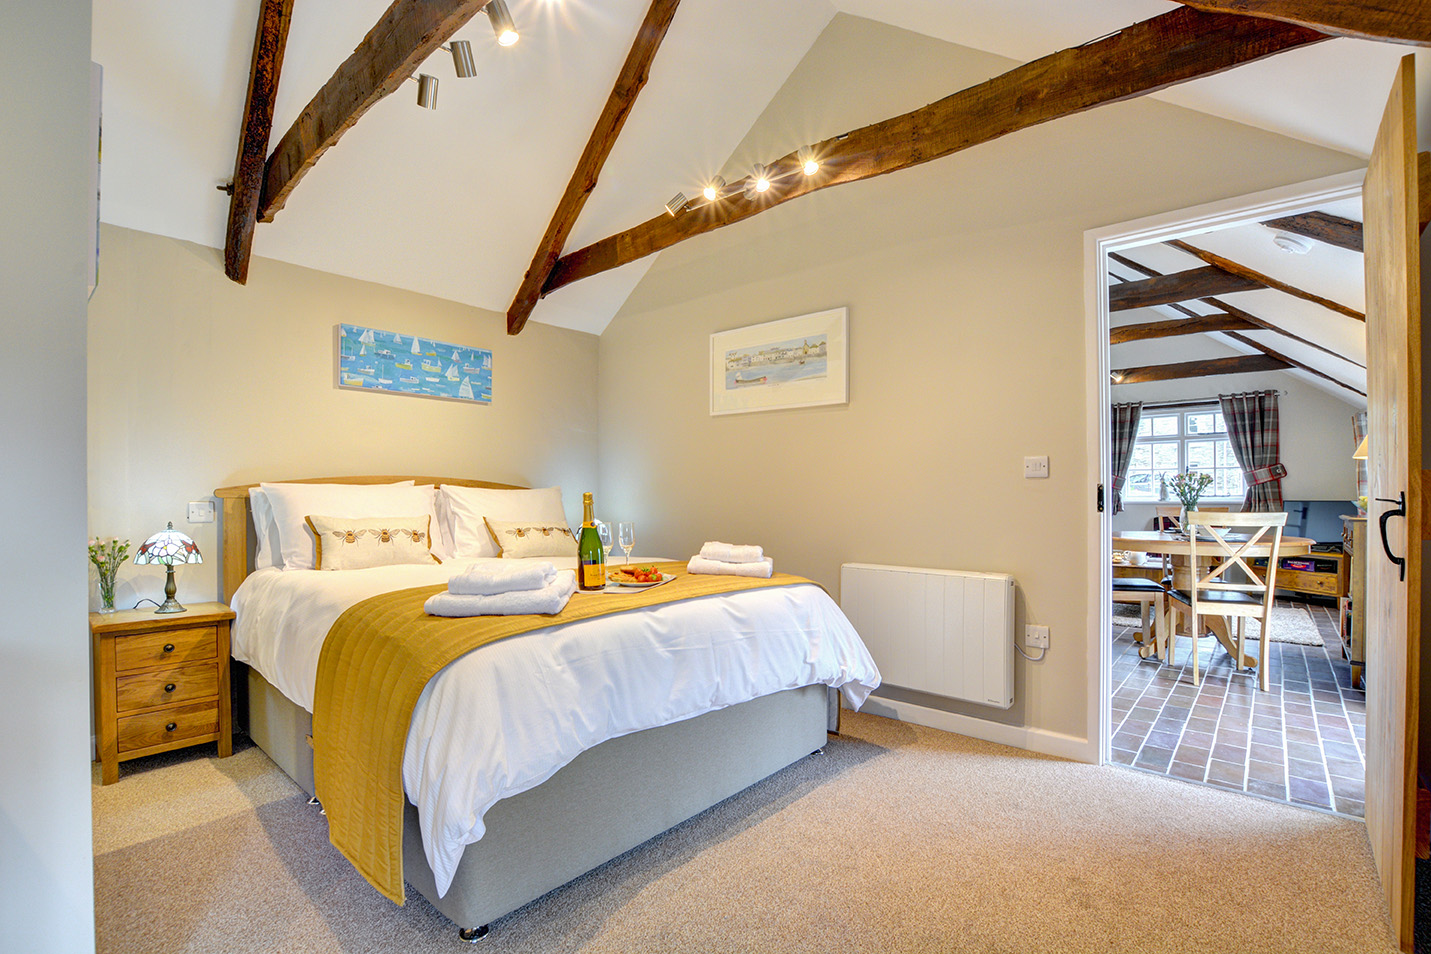 The bedroom of The Linney self catering cottage converted barn at Penrose Burden holiday cottages in Cornwall 02.jpg